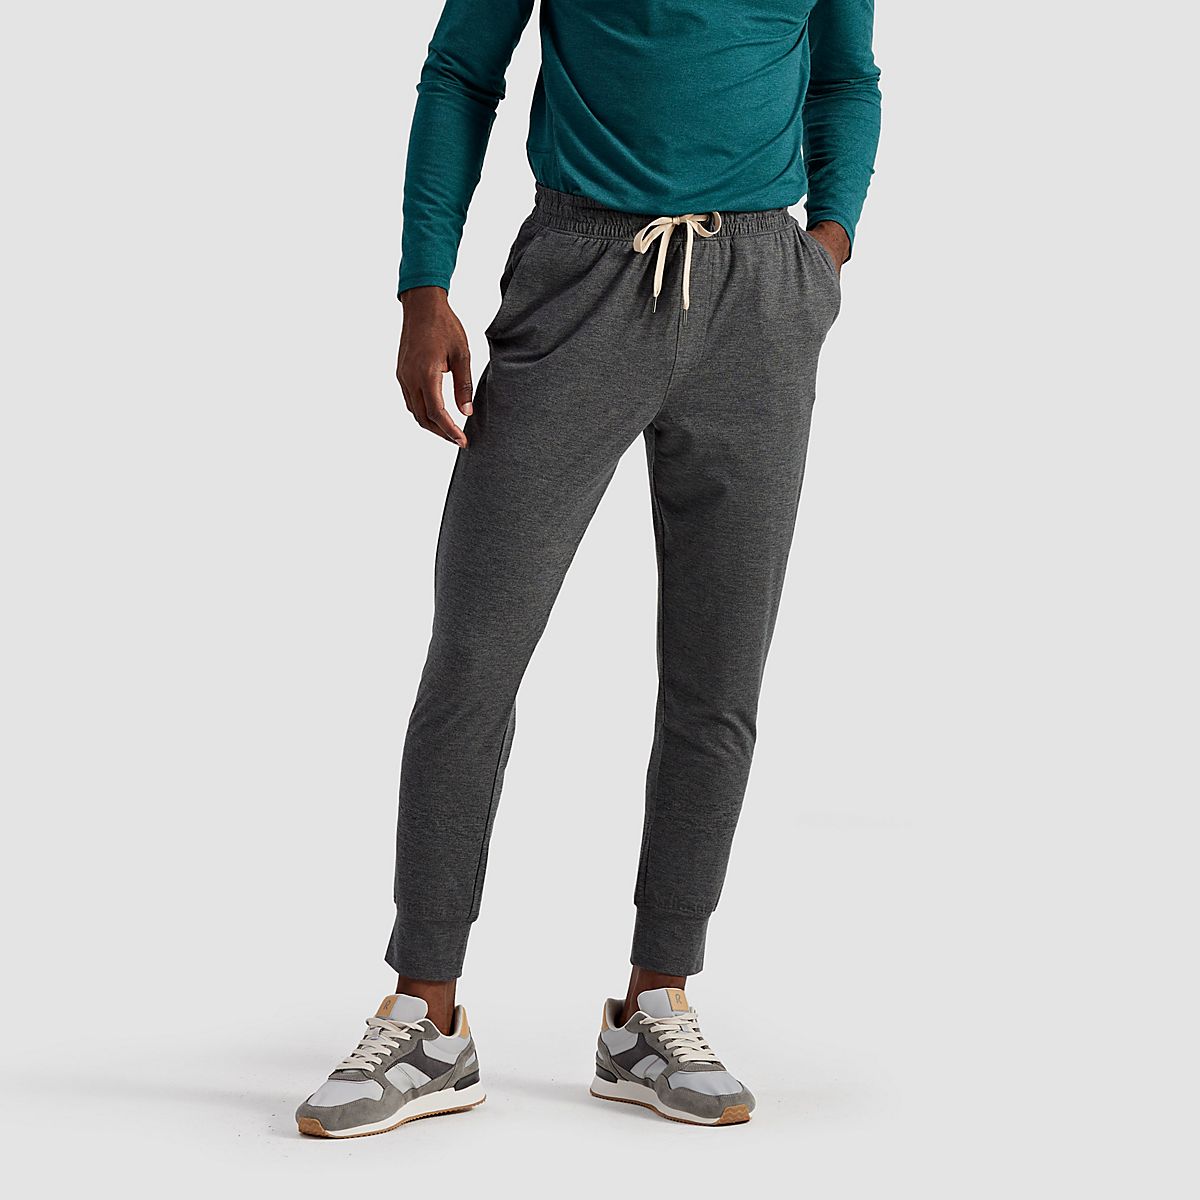 R.O.W. Men's Adam Cozy Joggers | Free Shipping at Academy